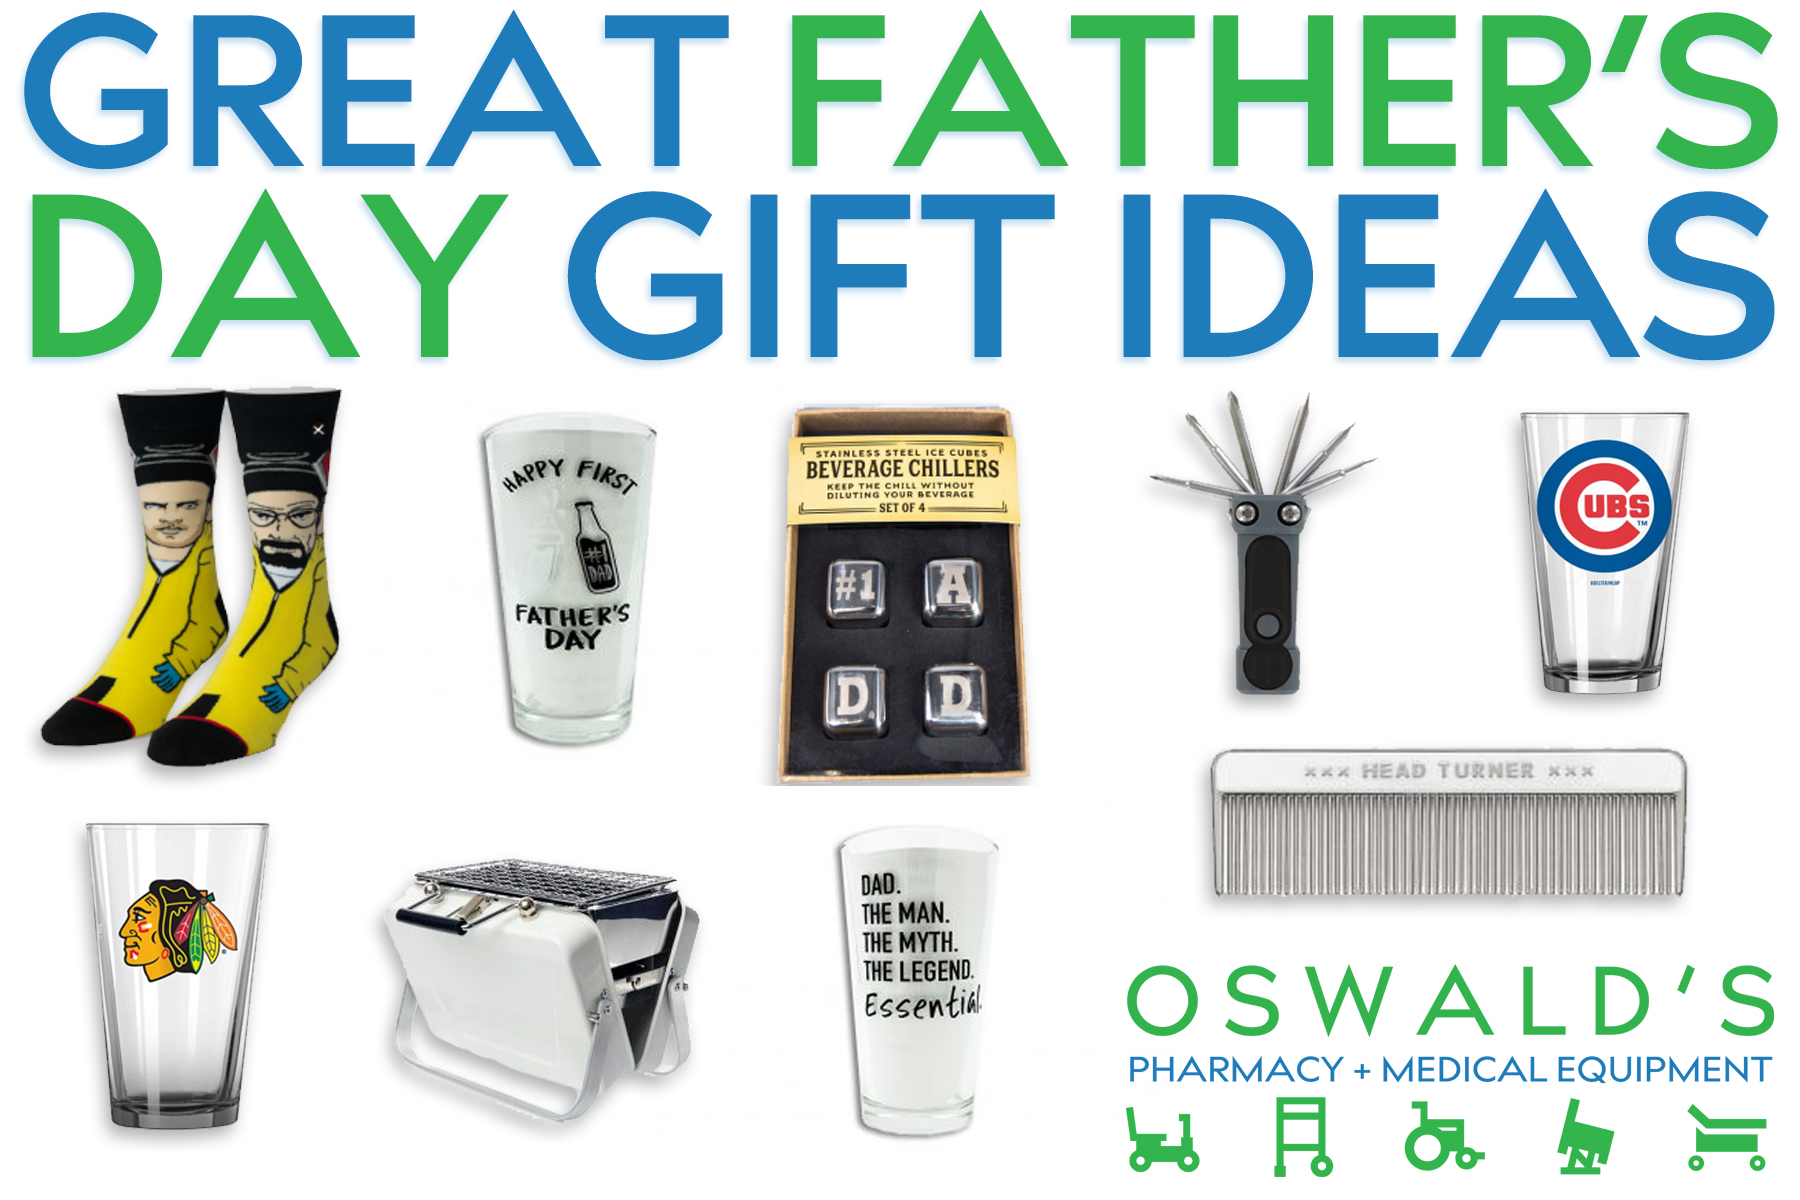 https://oswaldspharmacy.com/wp-content/uploads/2020/06/Great-Fathers-Day-Gift-Ideas-2020.jpg